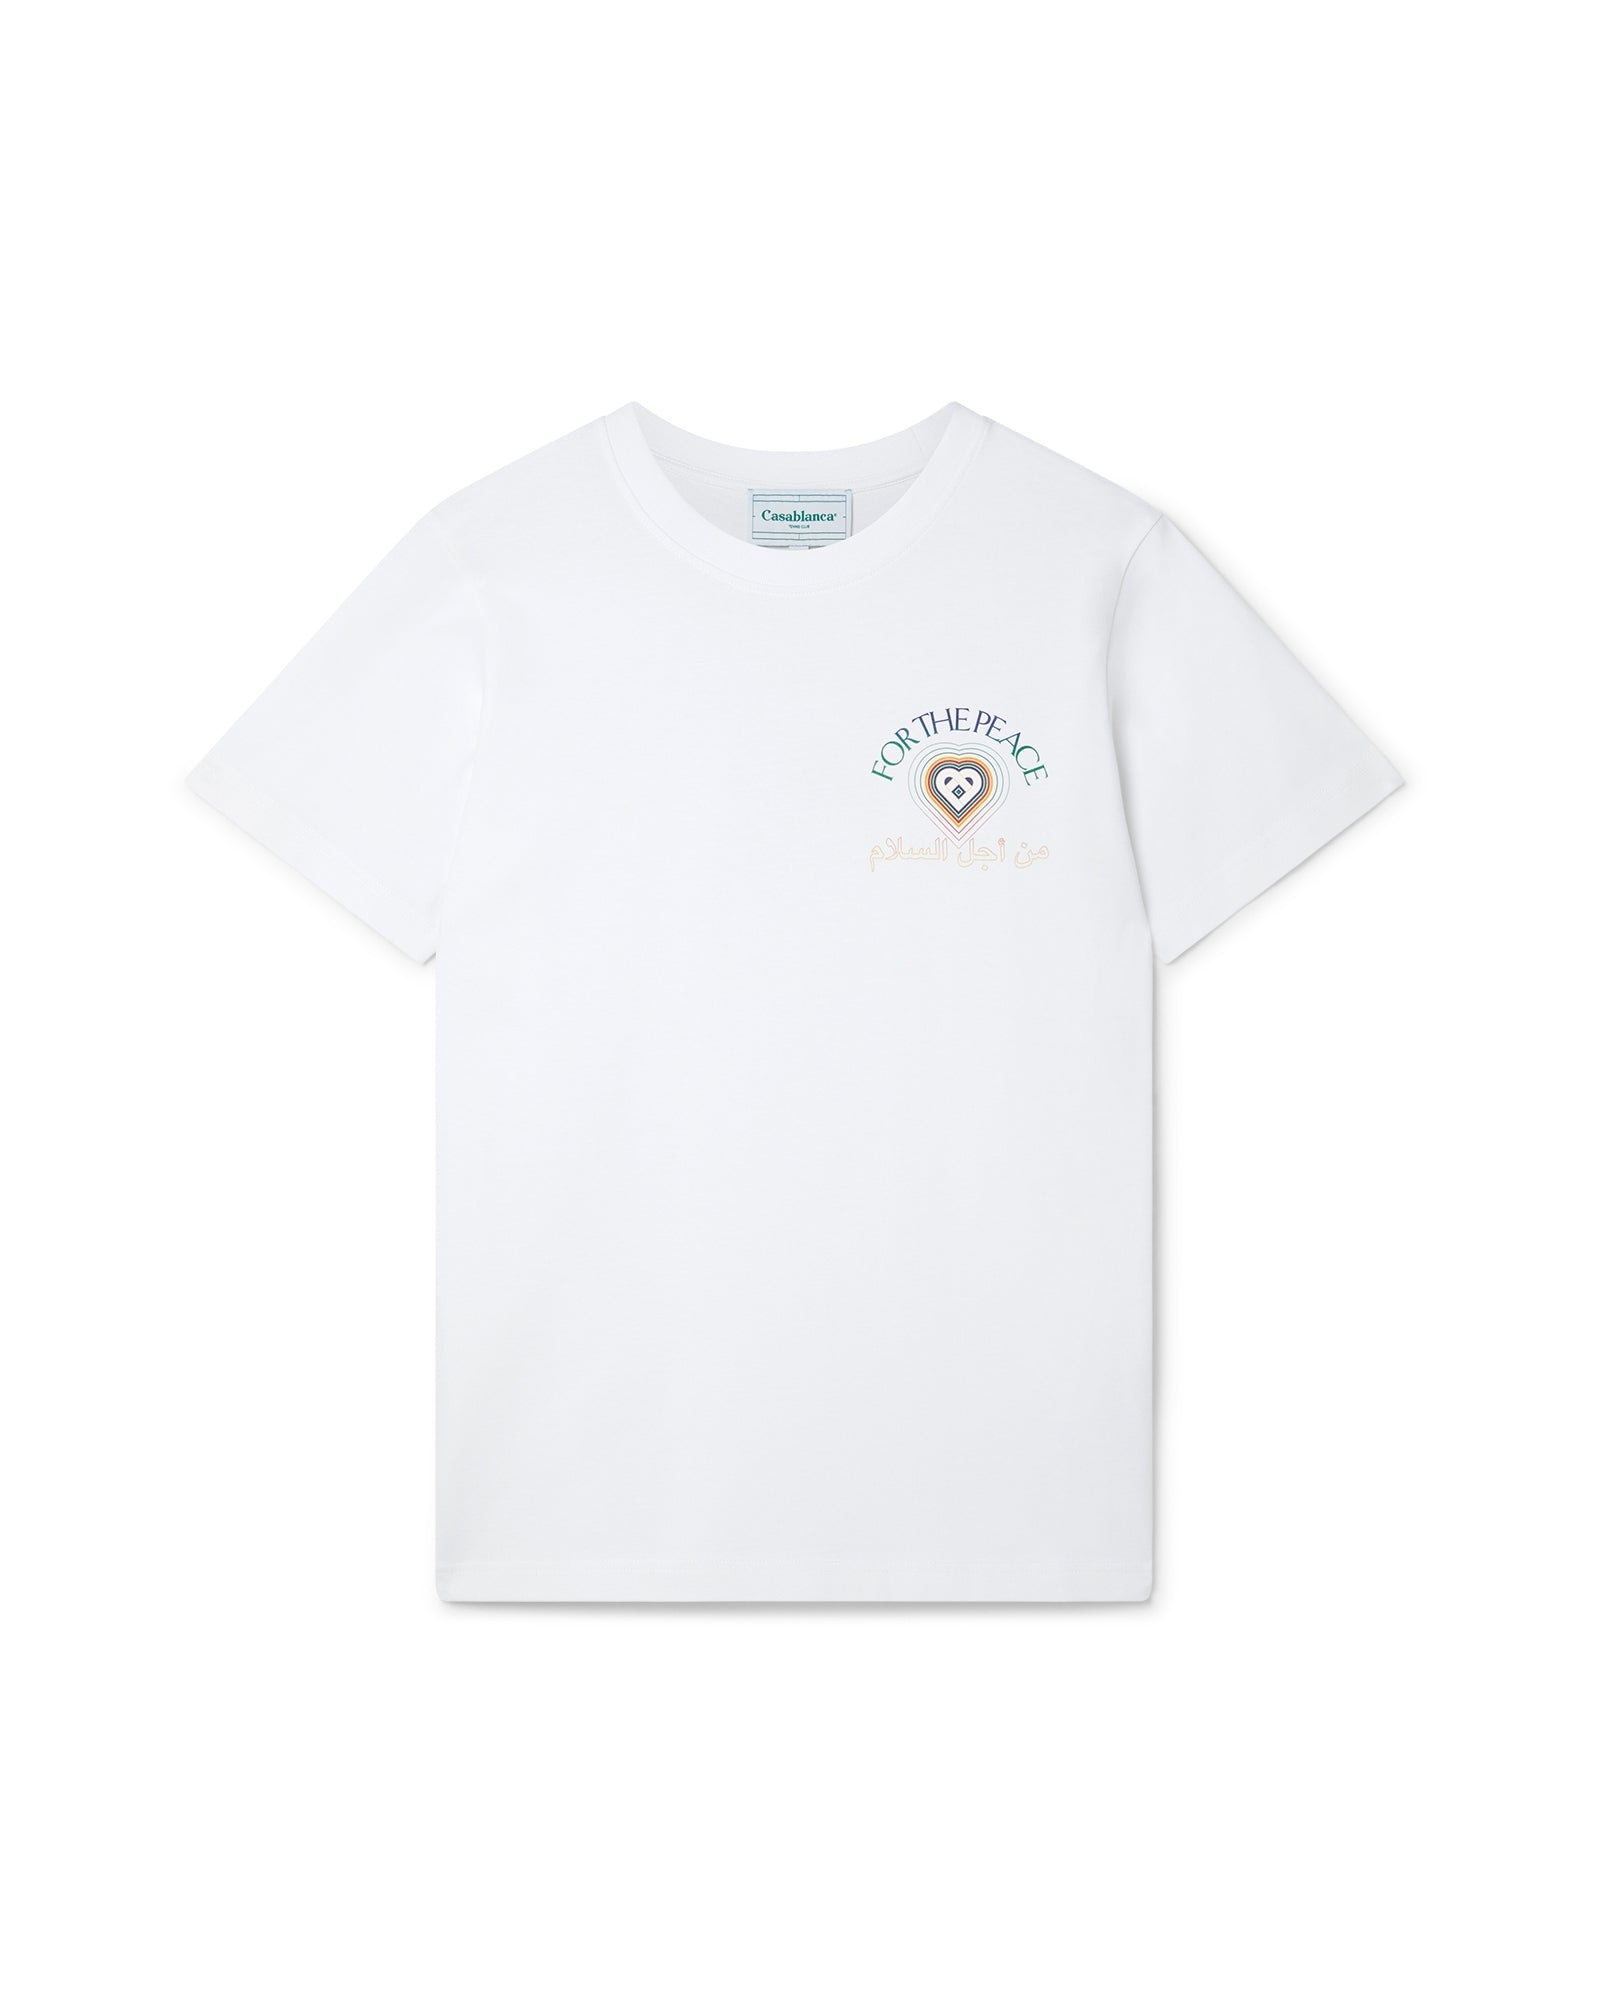 For The Peace T-Shirt - 1